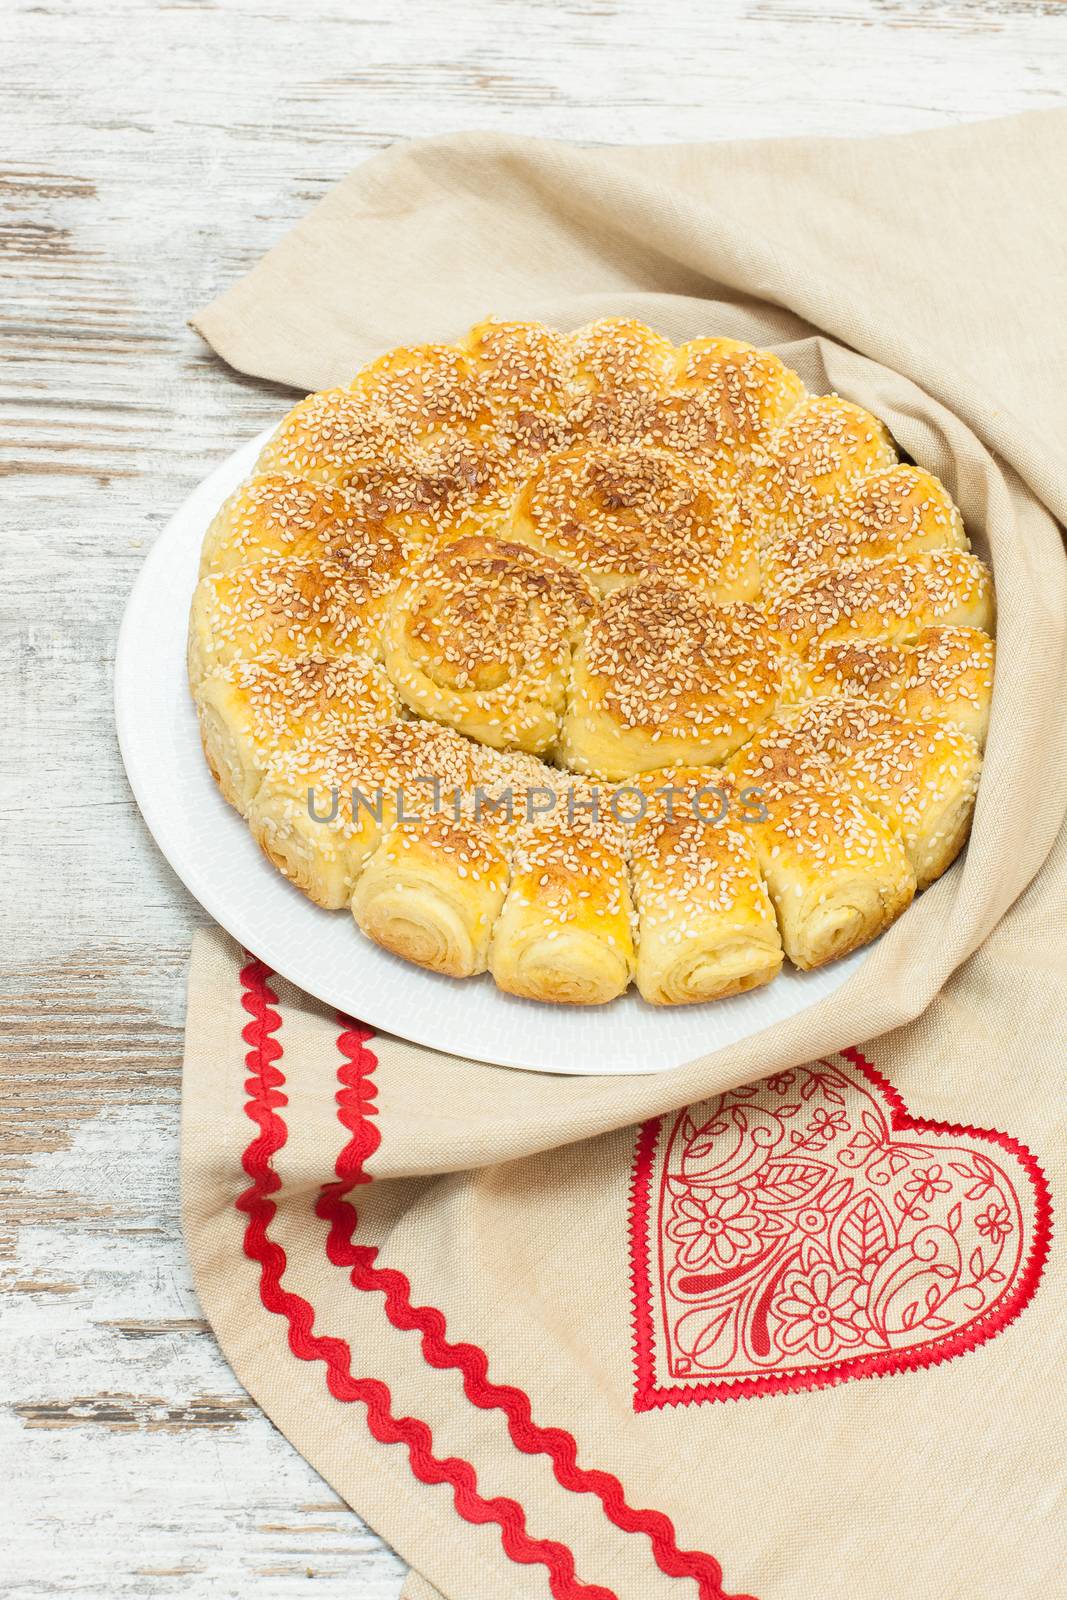 Bread with sesame seeds. Viewed from above